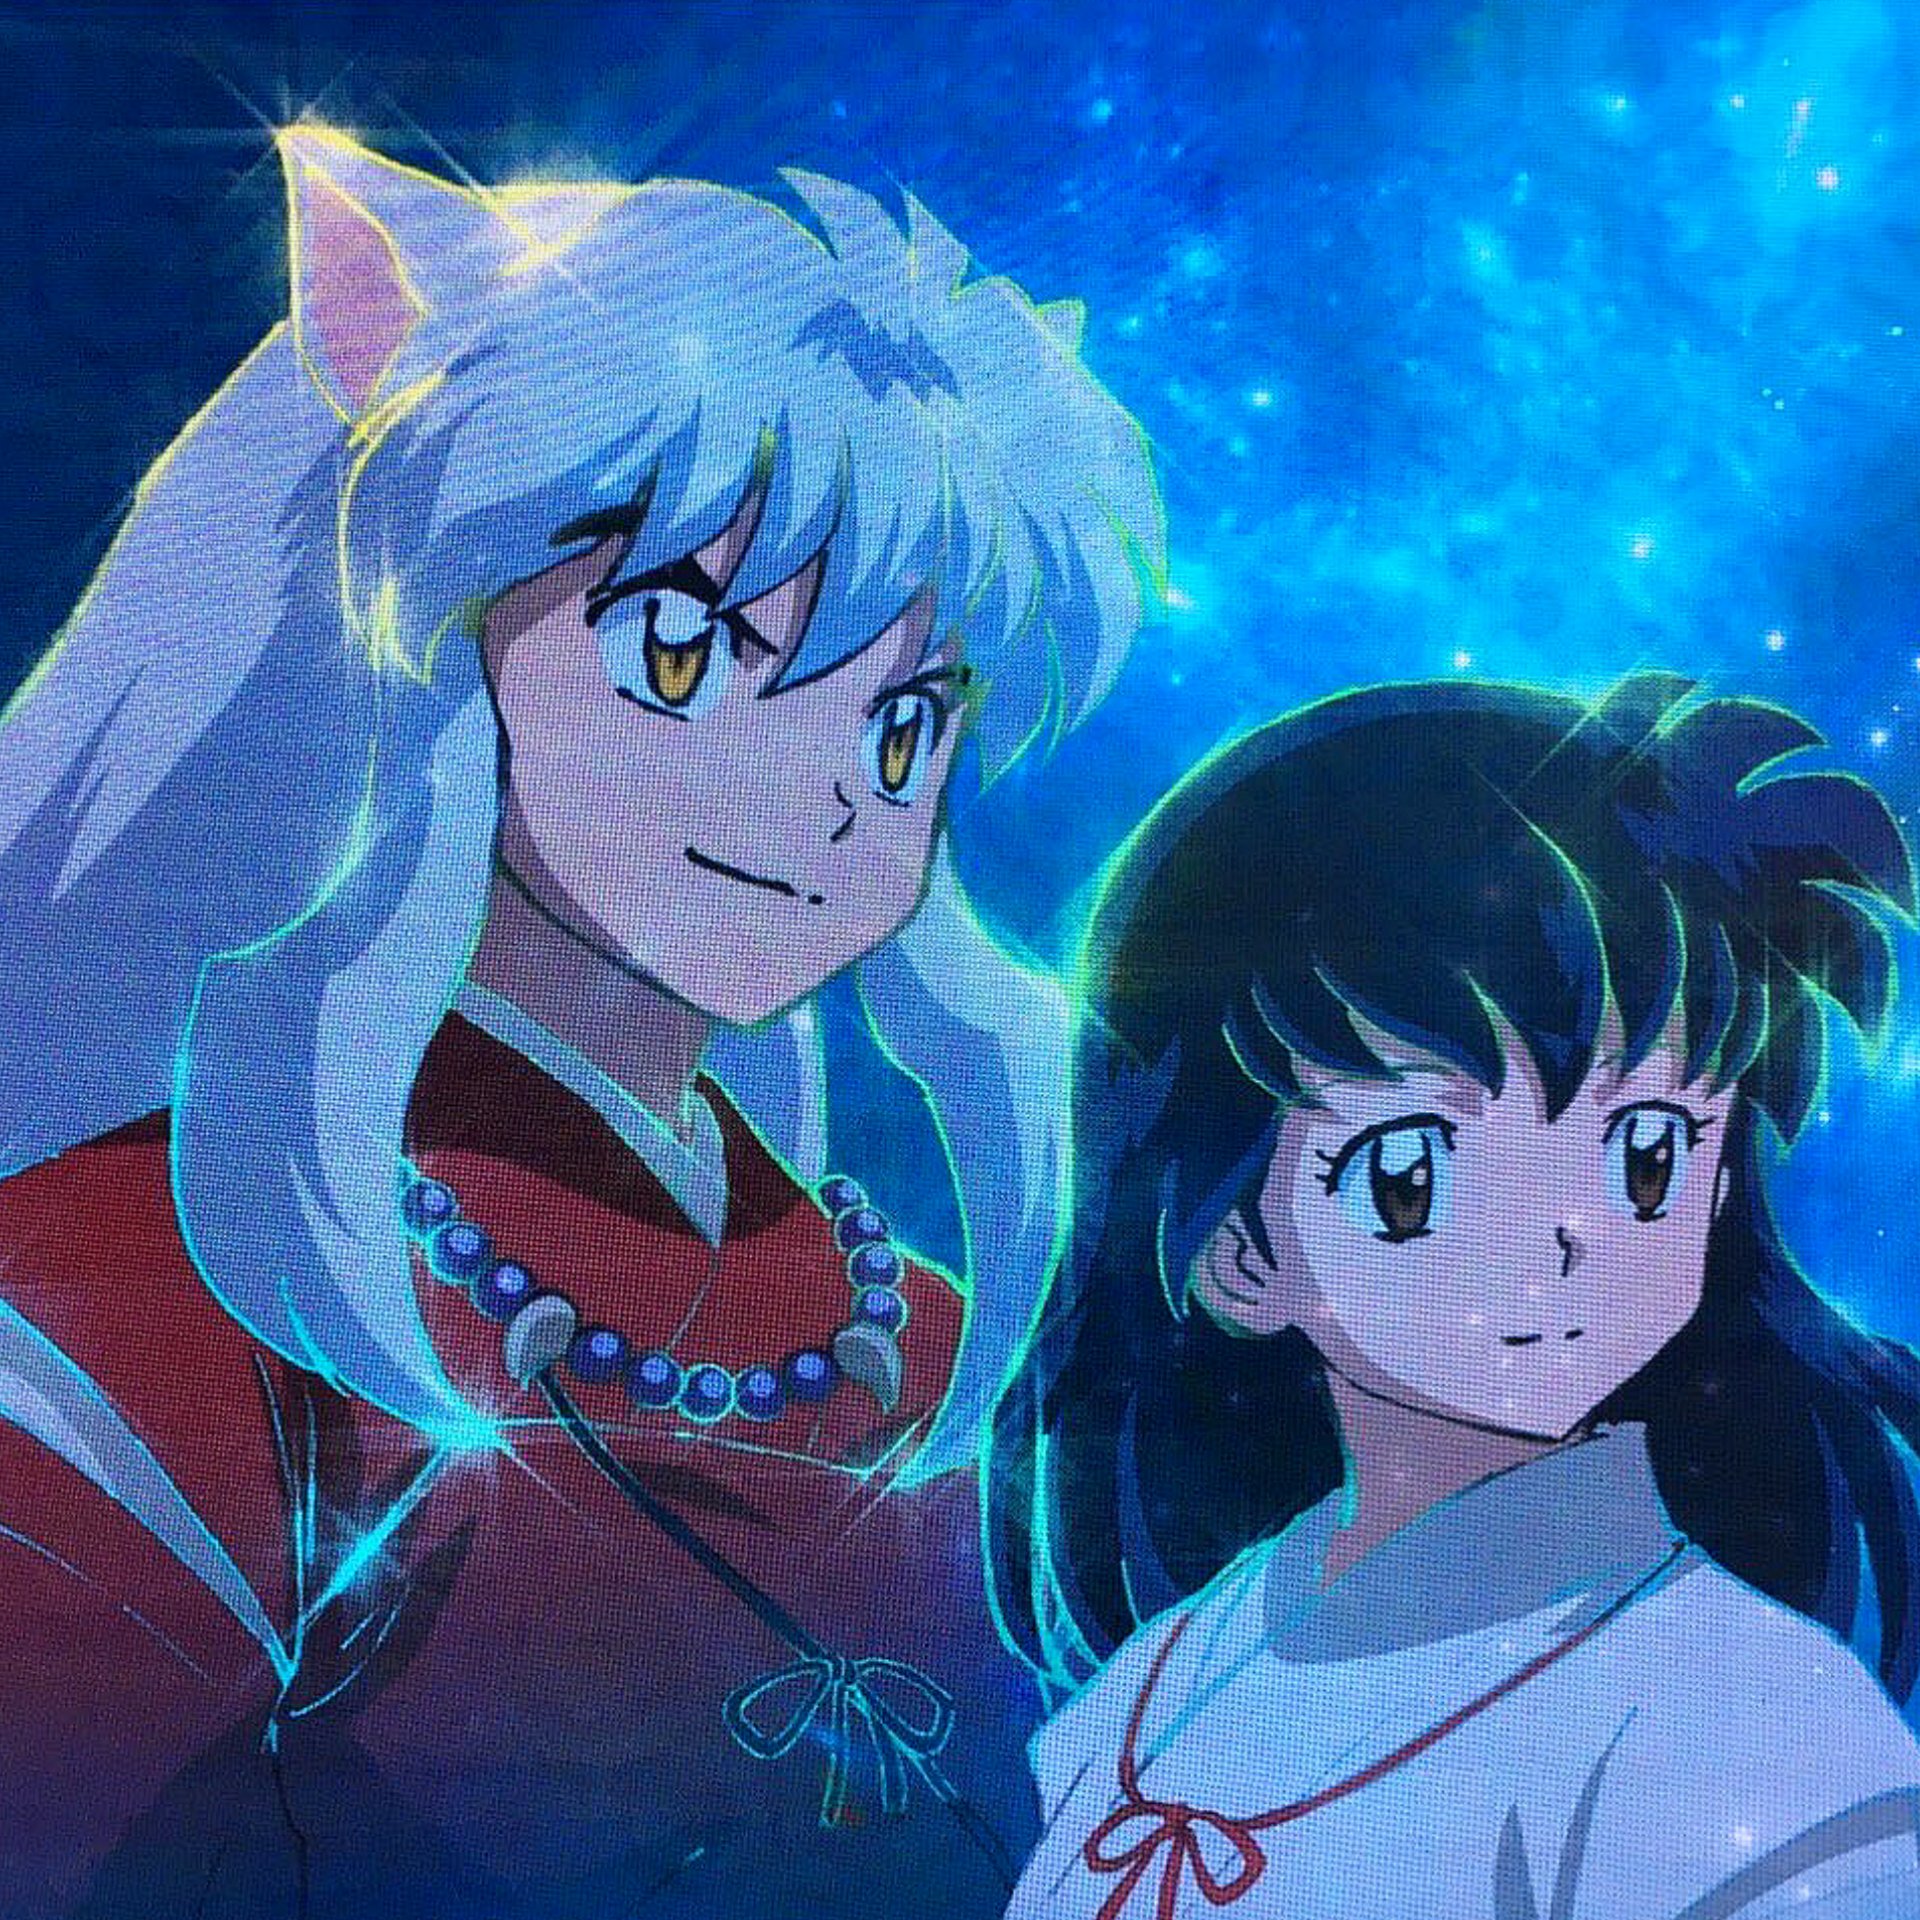 The red spider lillies 👌🏽👌🏽🔥🔥 i love inuyasha so much